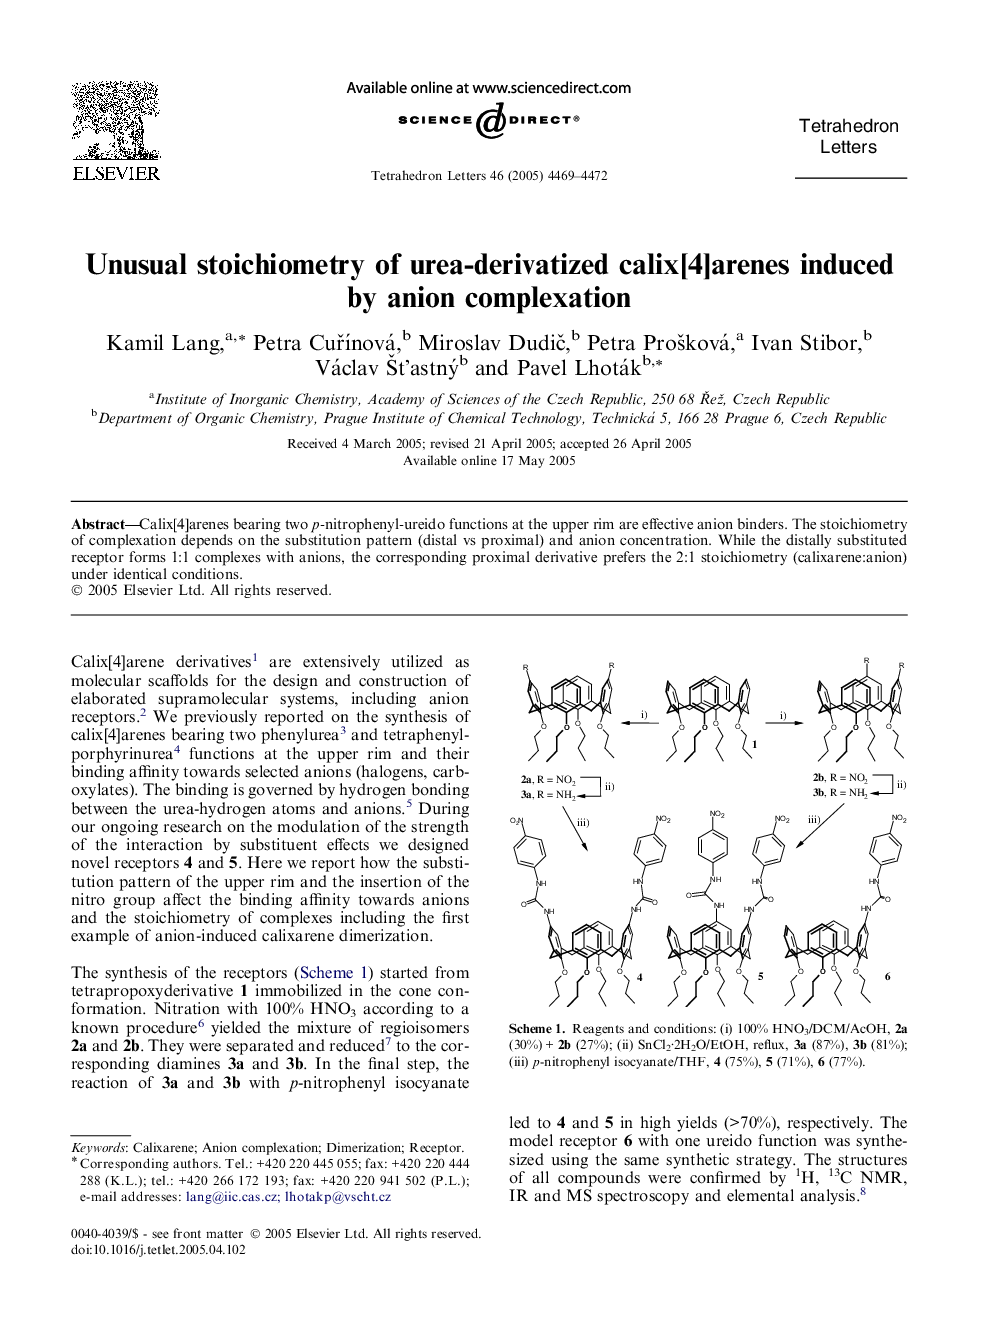 Unusual stoichiometry of urea-derivatized calix[4]arenes induced by anion complexation